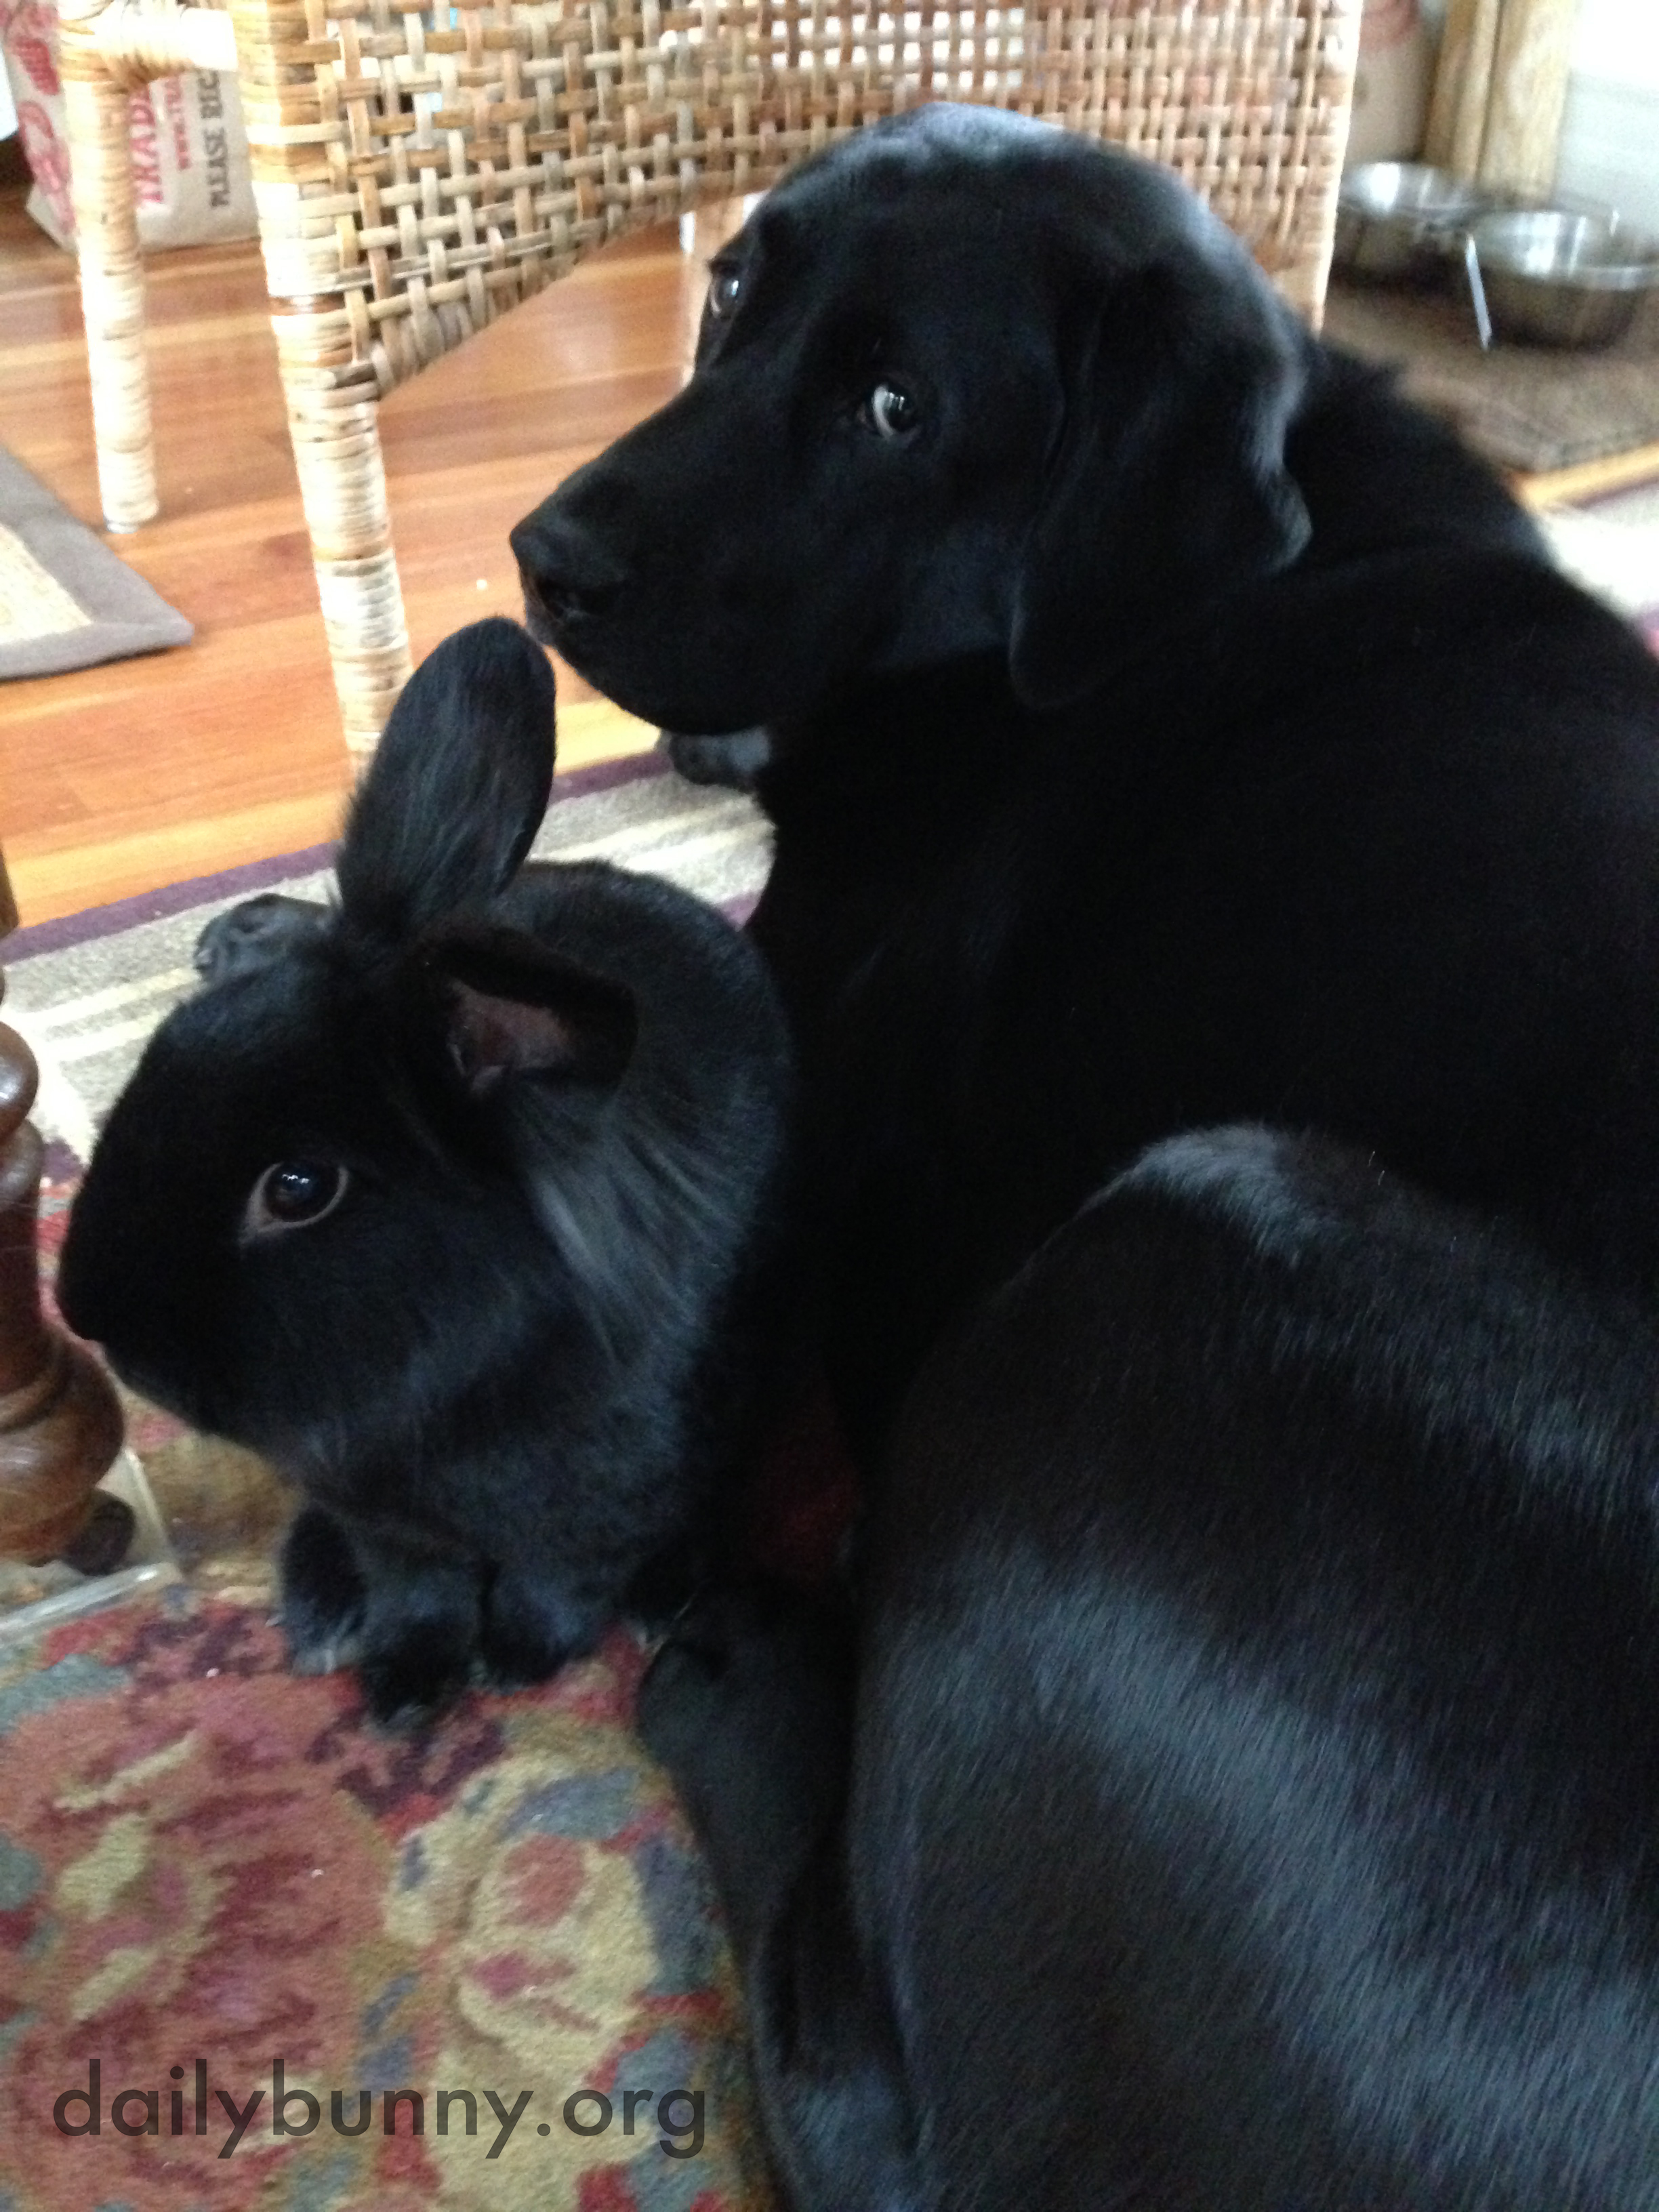 Bunny and His Dog Friend Are Two of a Kind